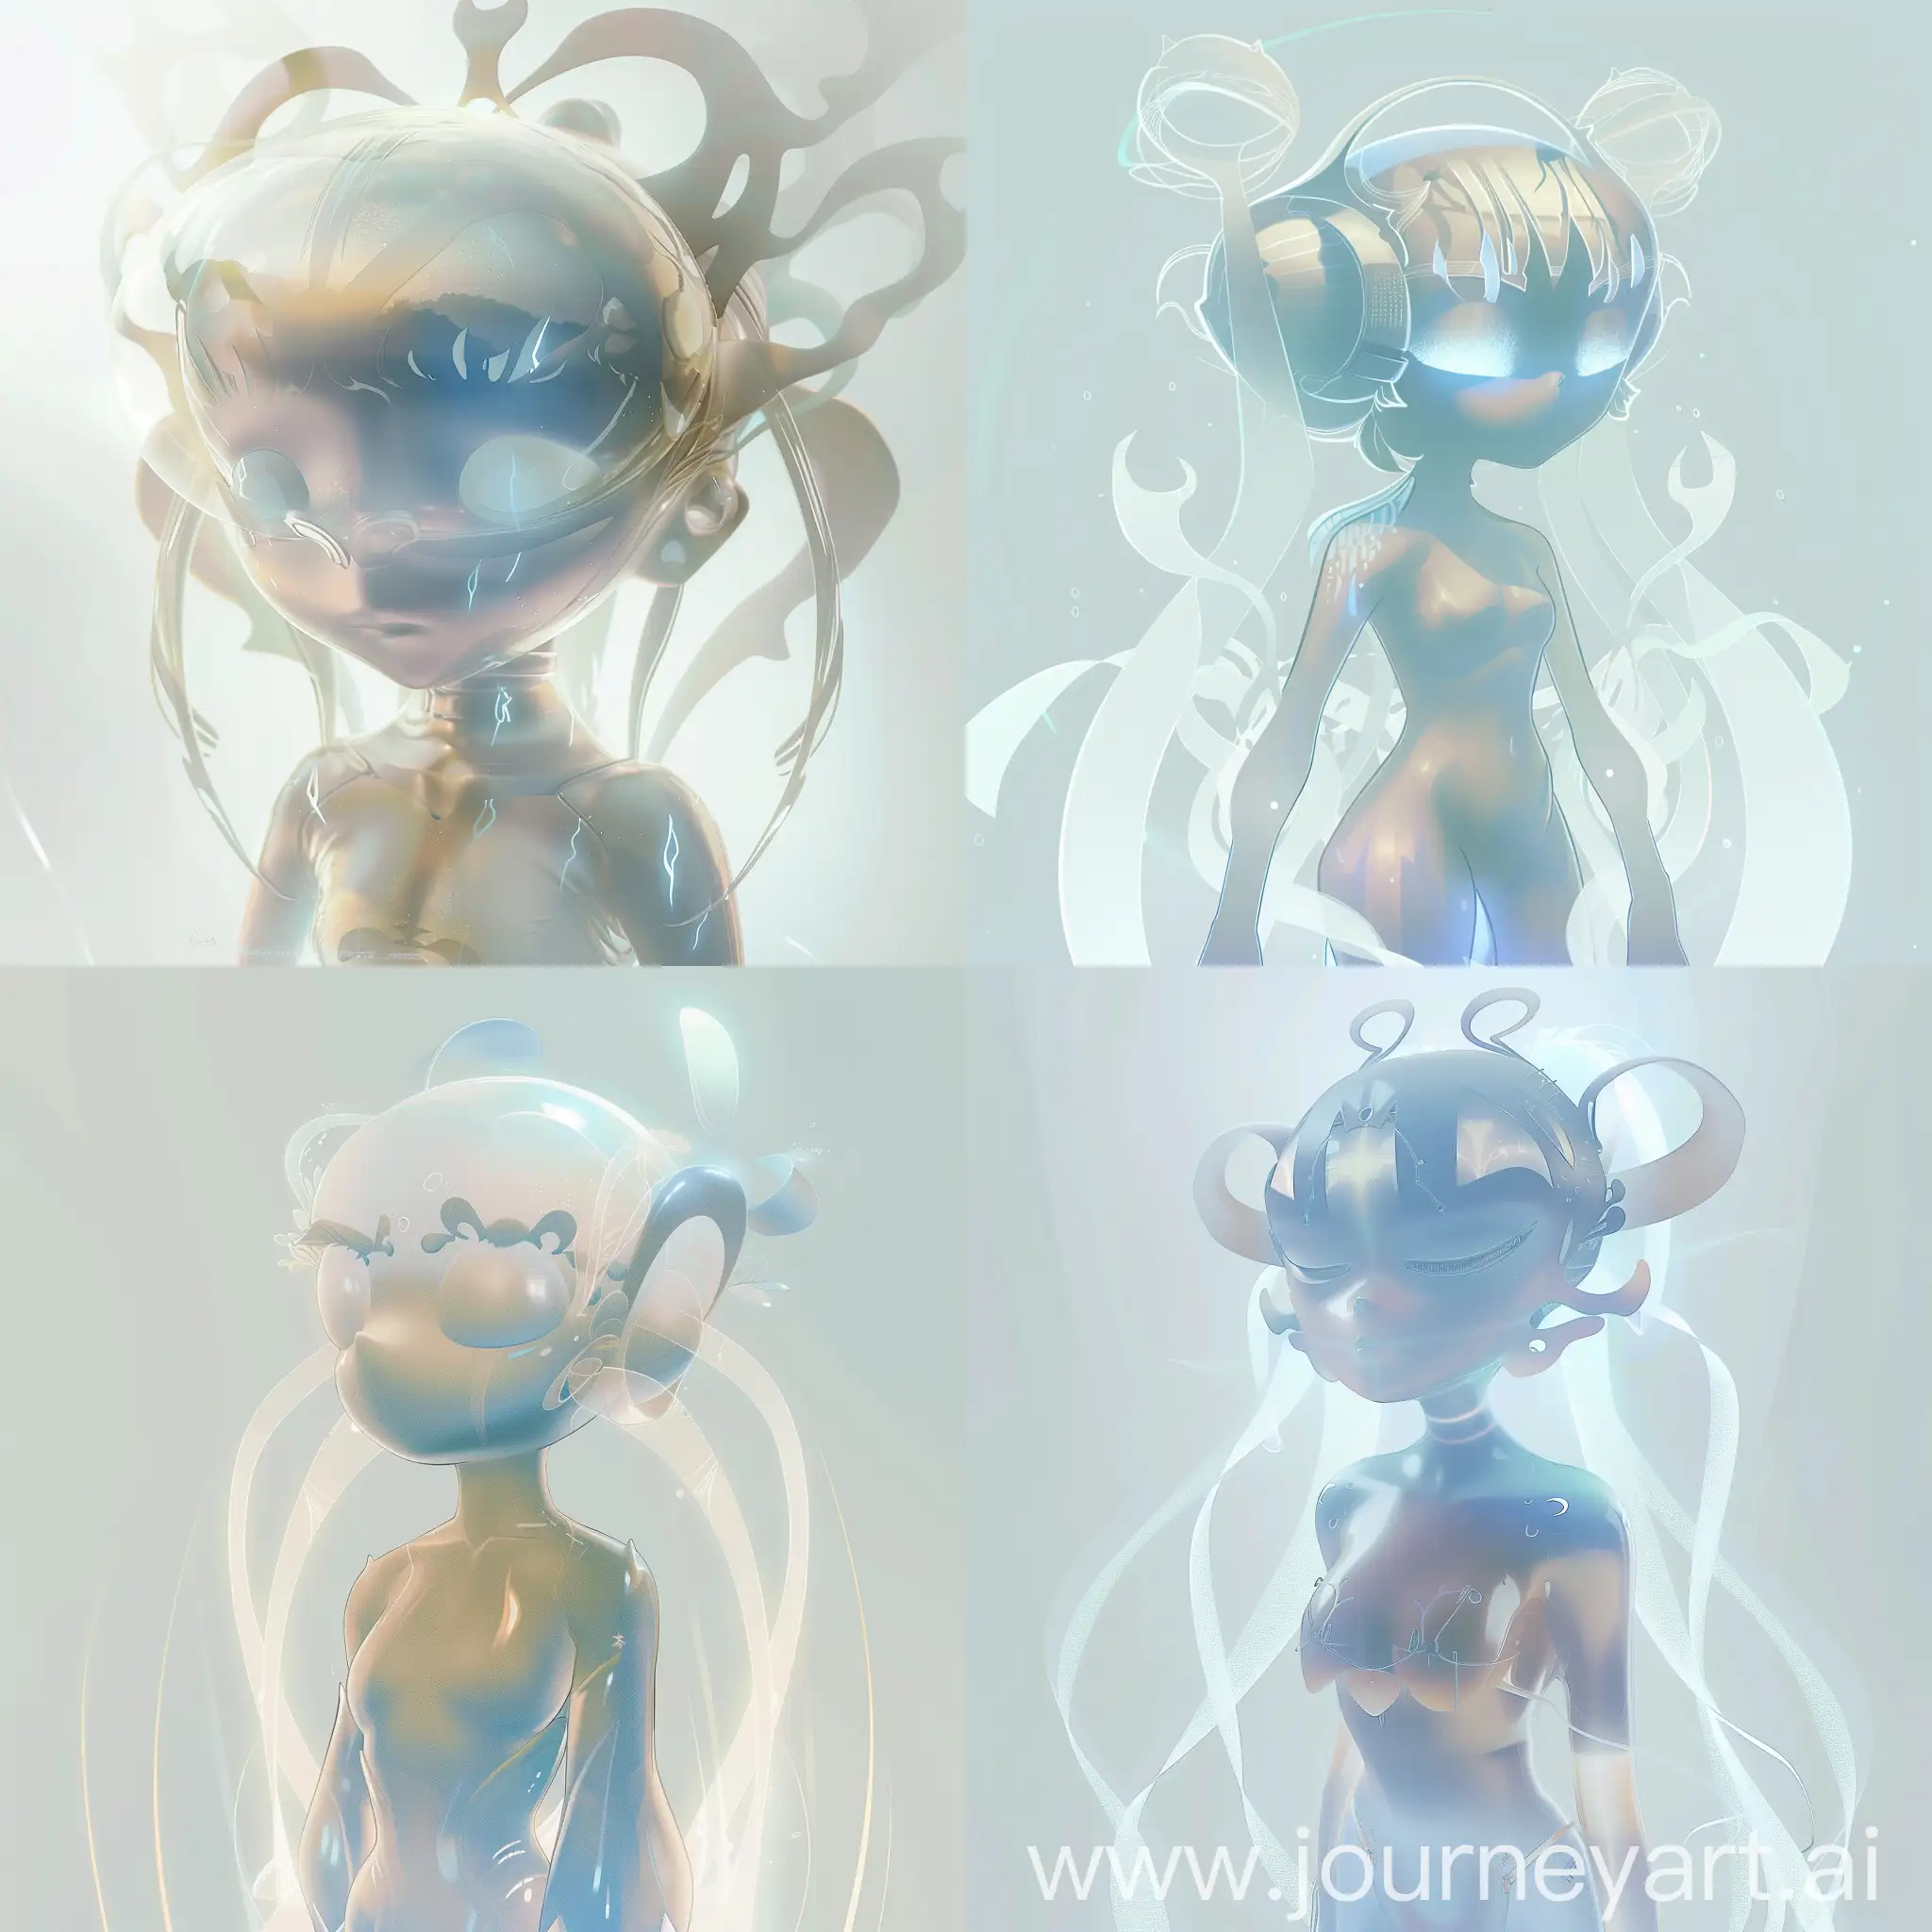 Futuristic-Ethereal-Character-with-Bioluminescent-Elements-in-Soft-Pastels